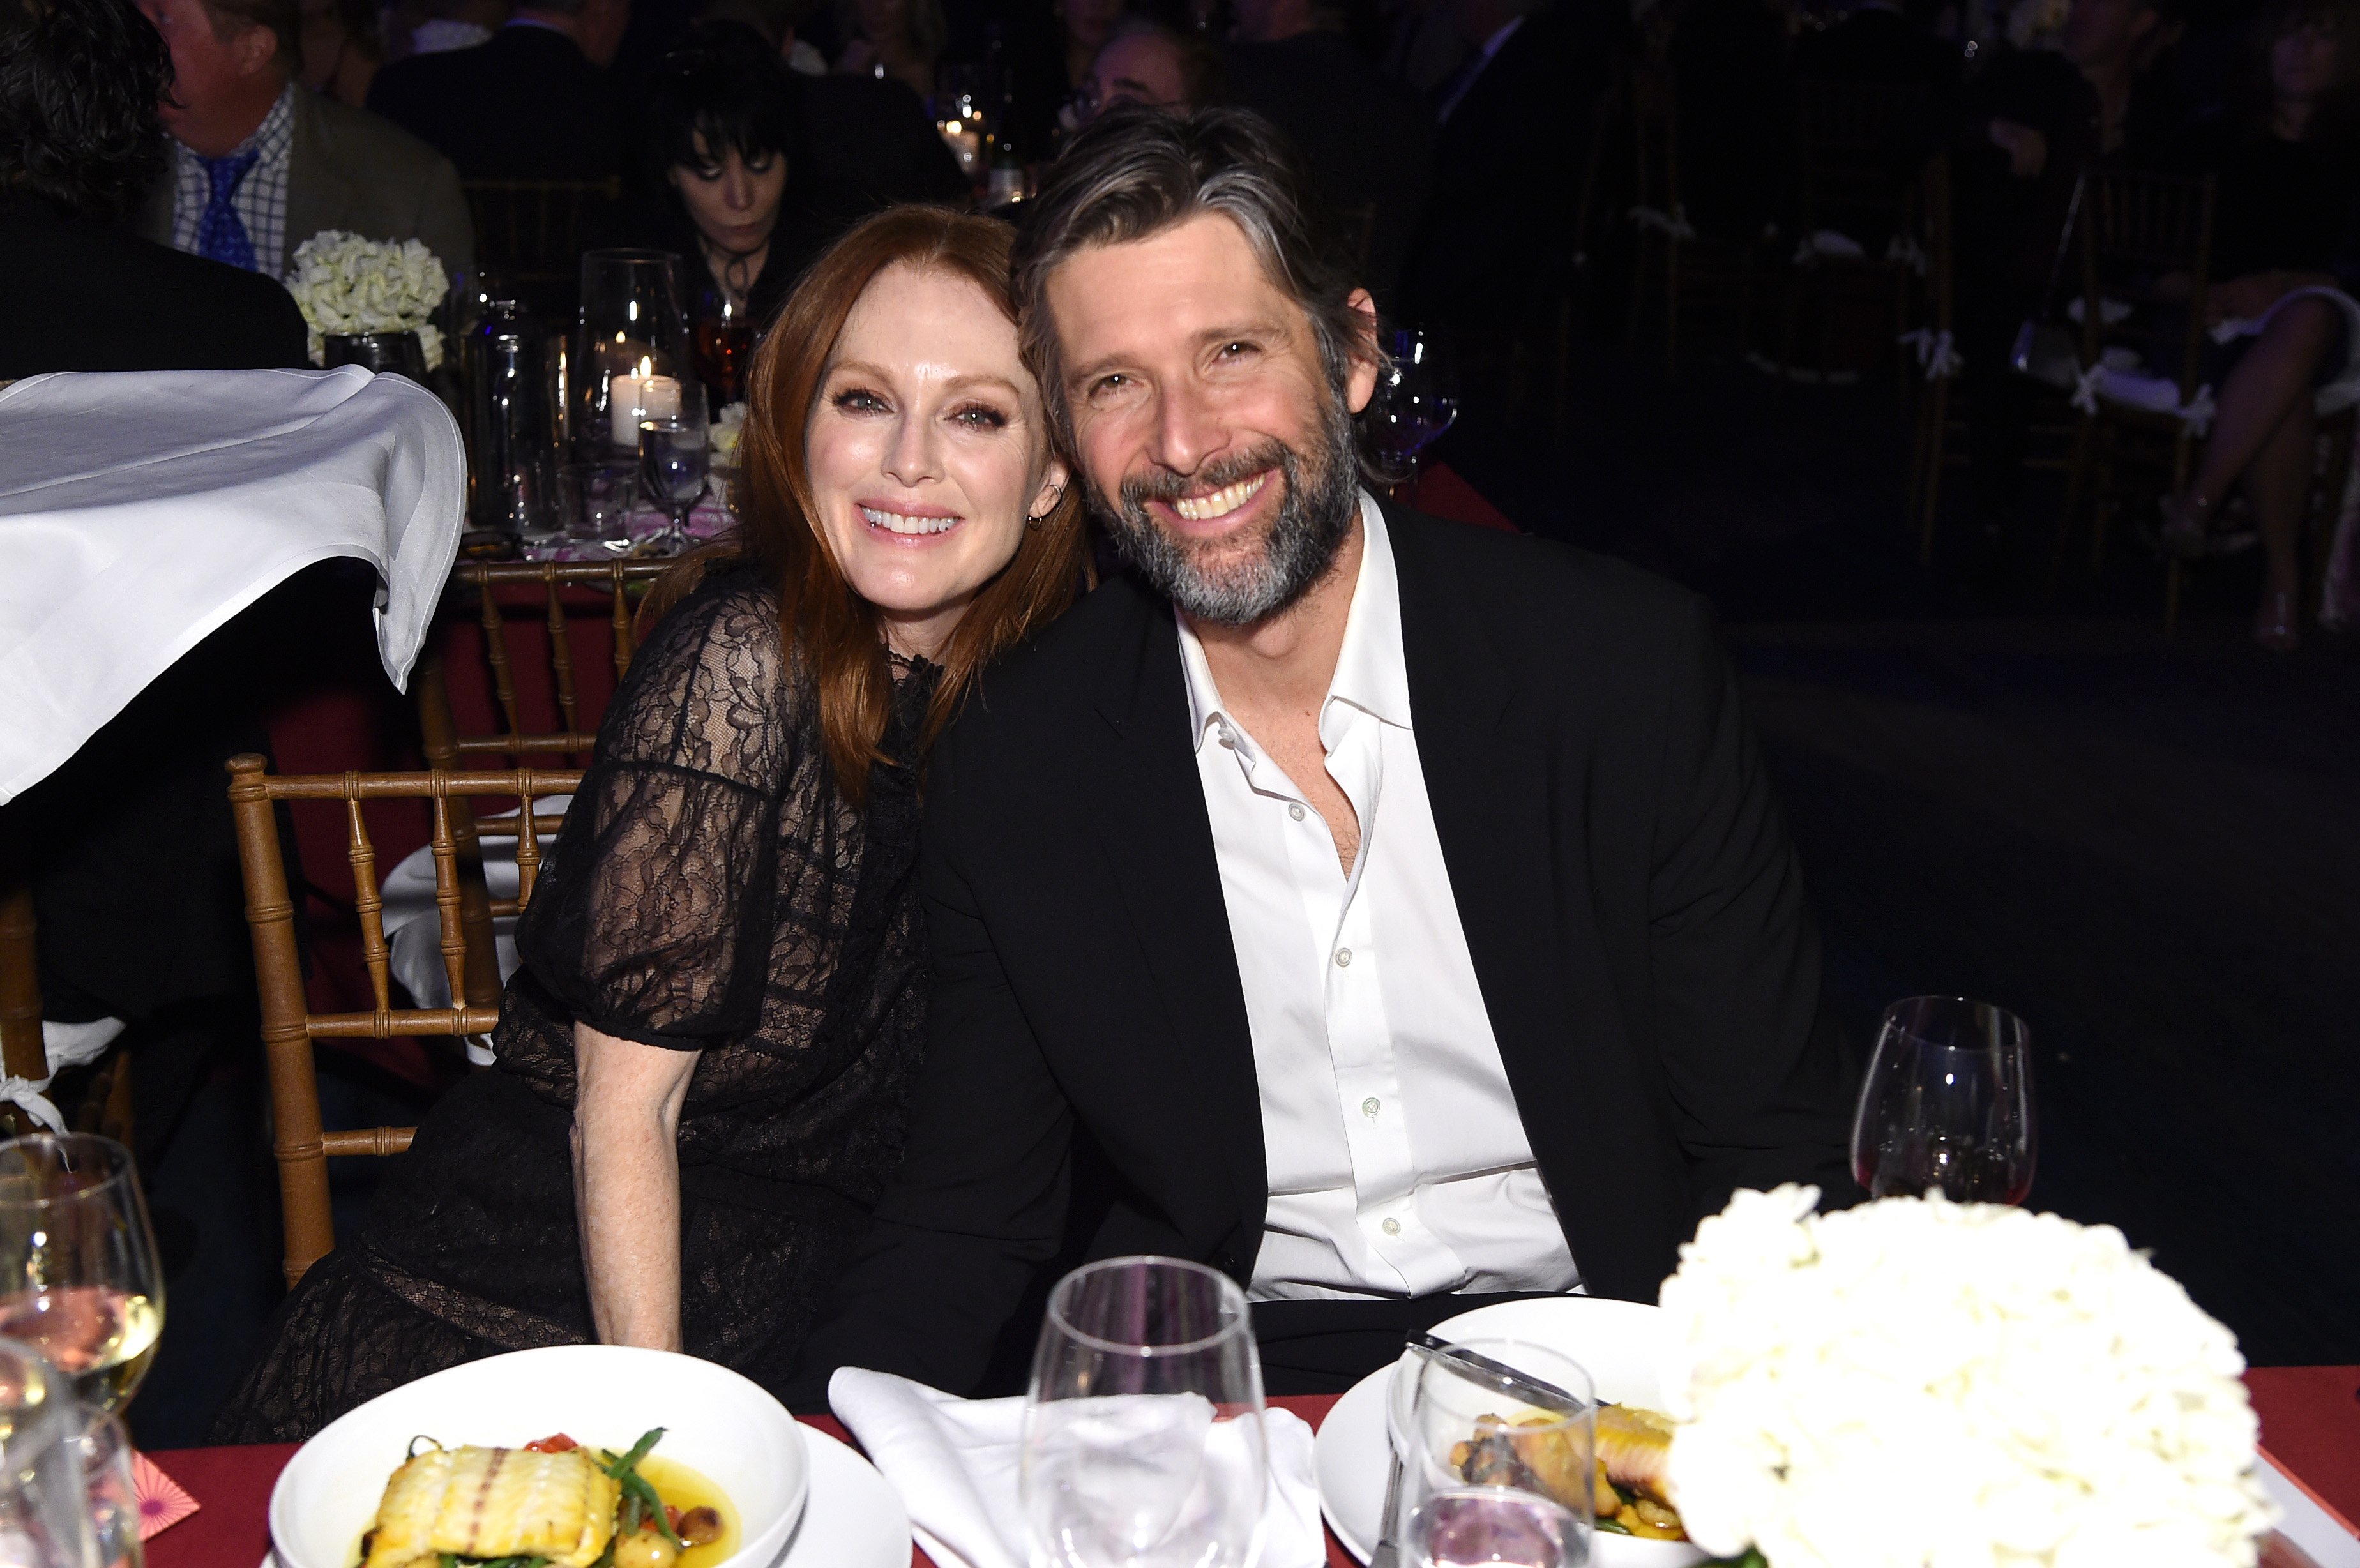 Julianne Moore and Bart Freundlich attend the event A Funny Thing Happened On The Way To Cure Parkinson's in New York City on November 16, 2019 | Photo: Getty Images